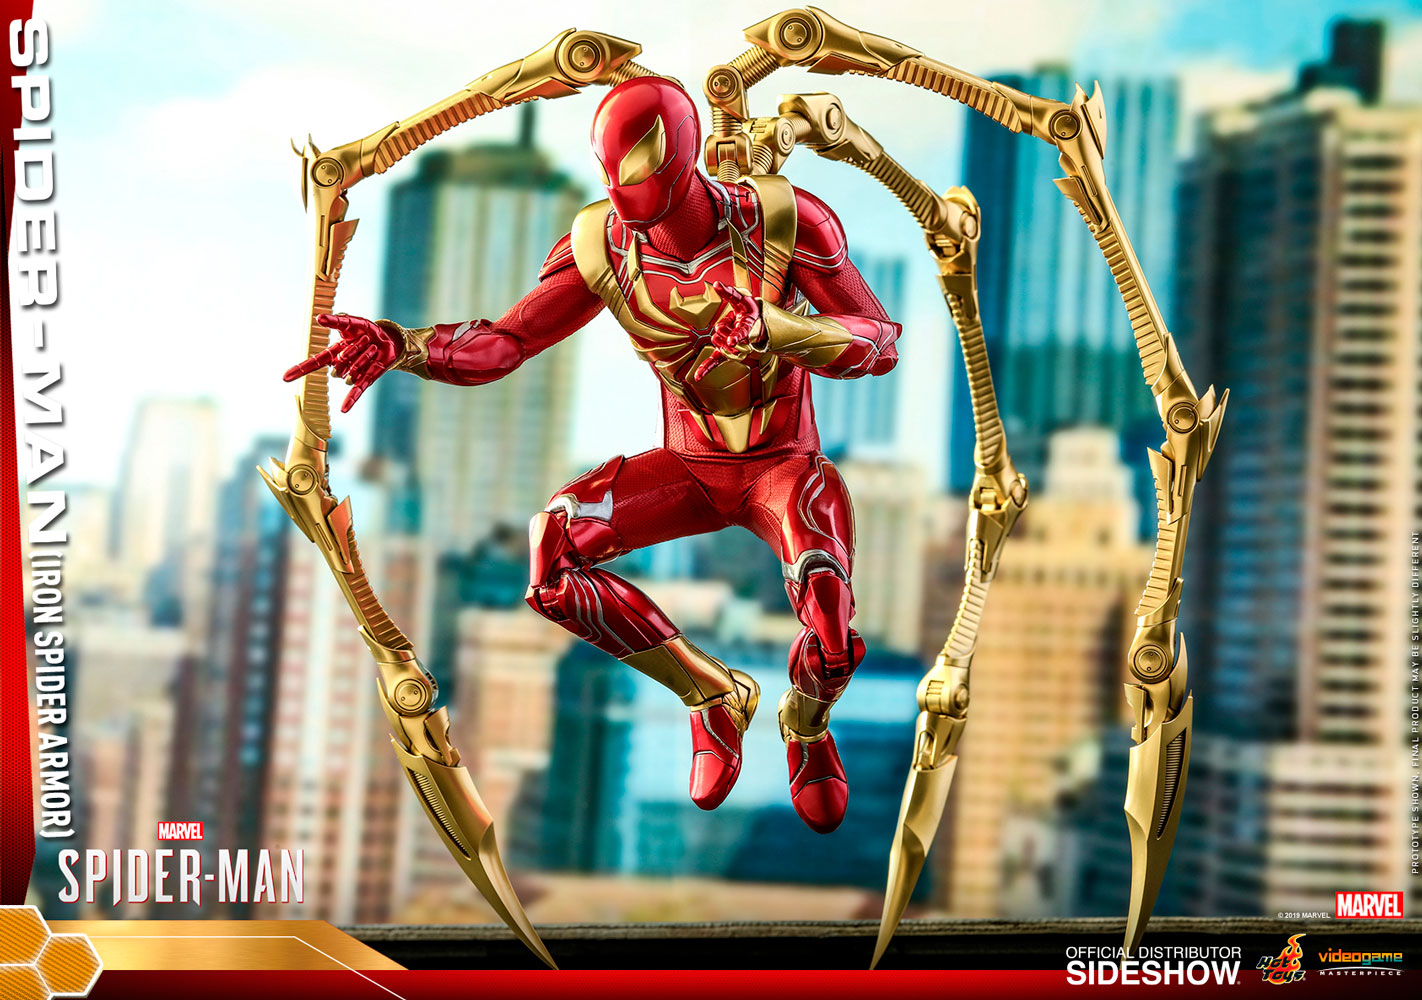 Hot Toys Iron Spider Armor Spider-Man 1/6 Figure Up for Order ...